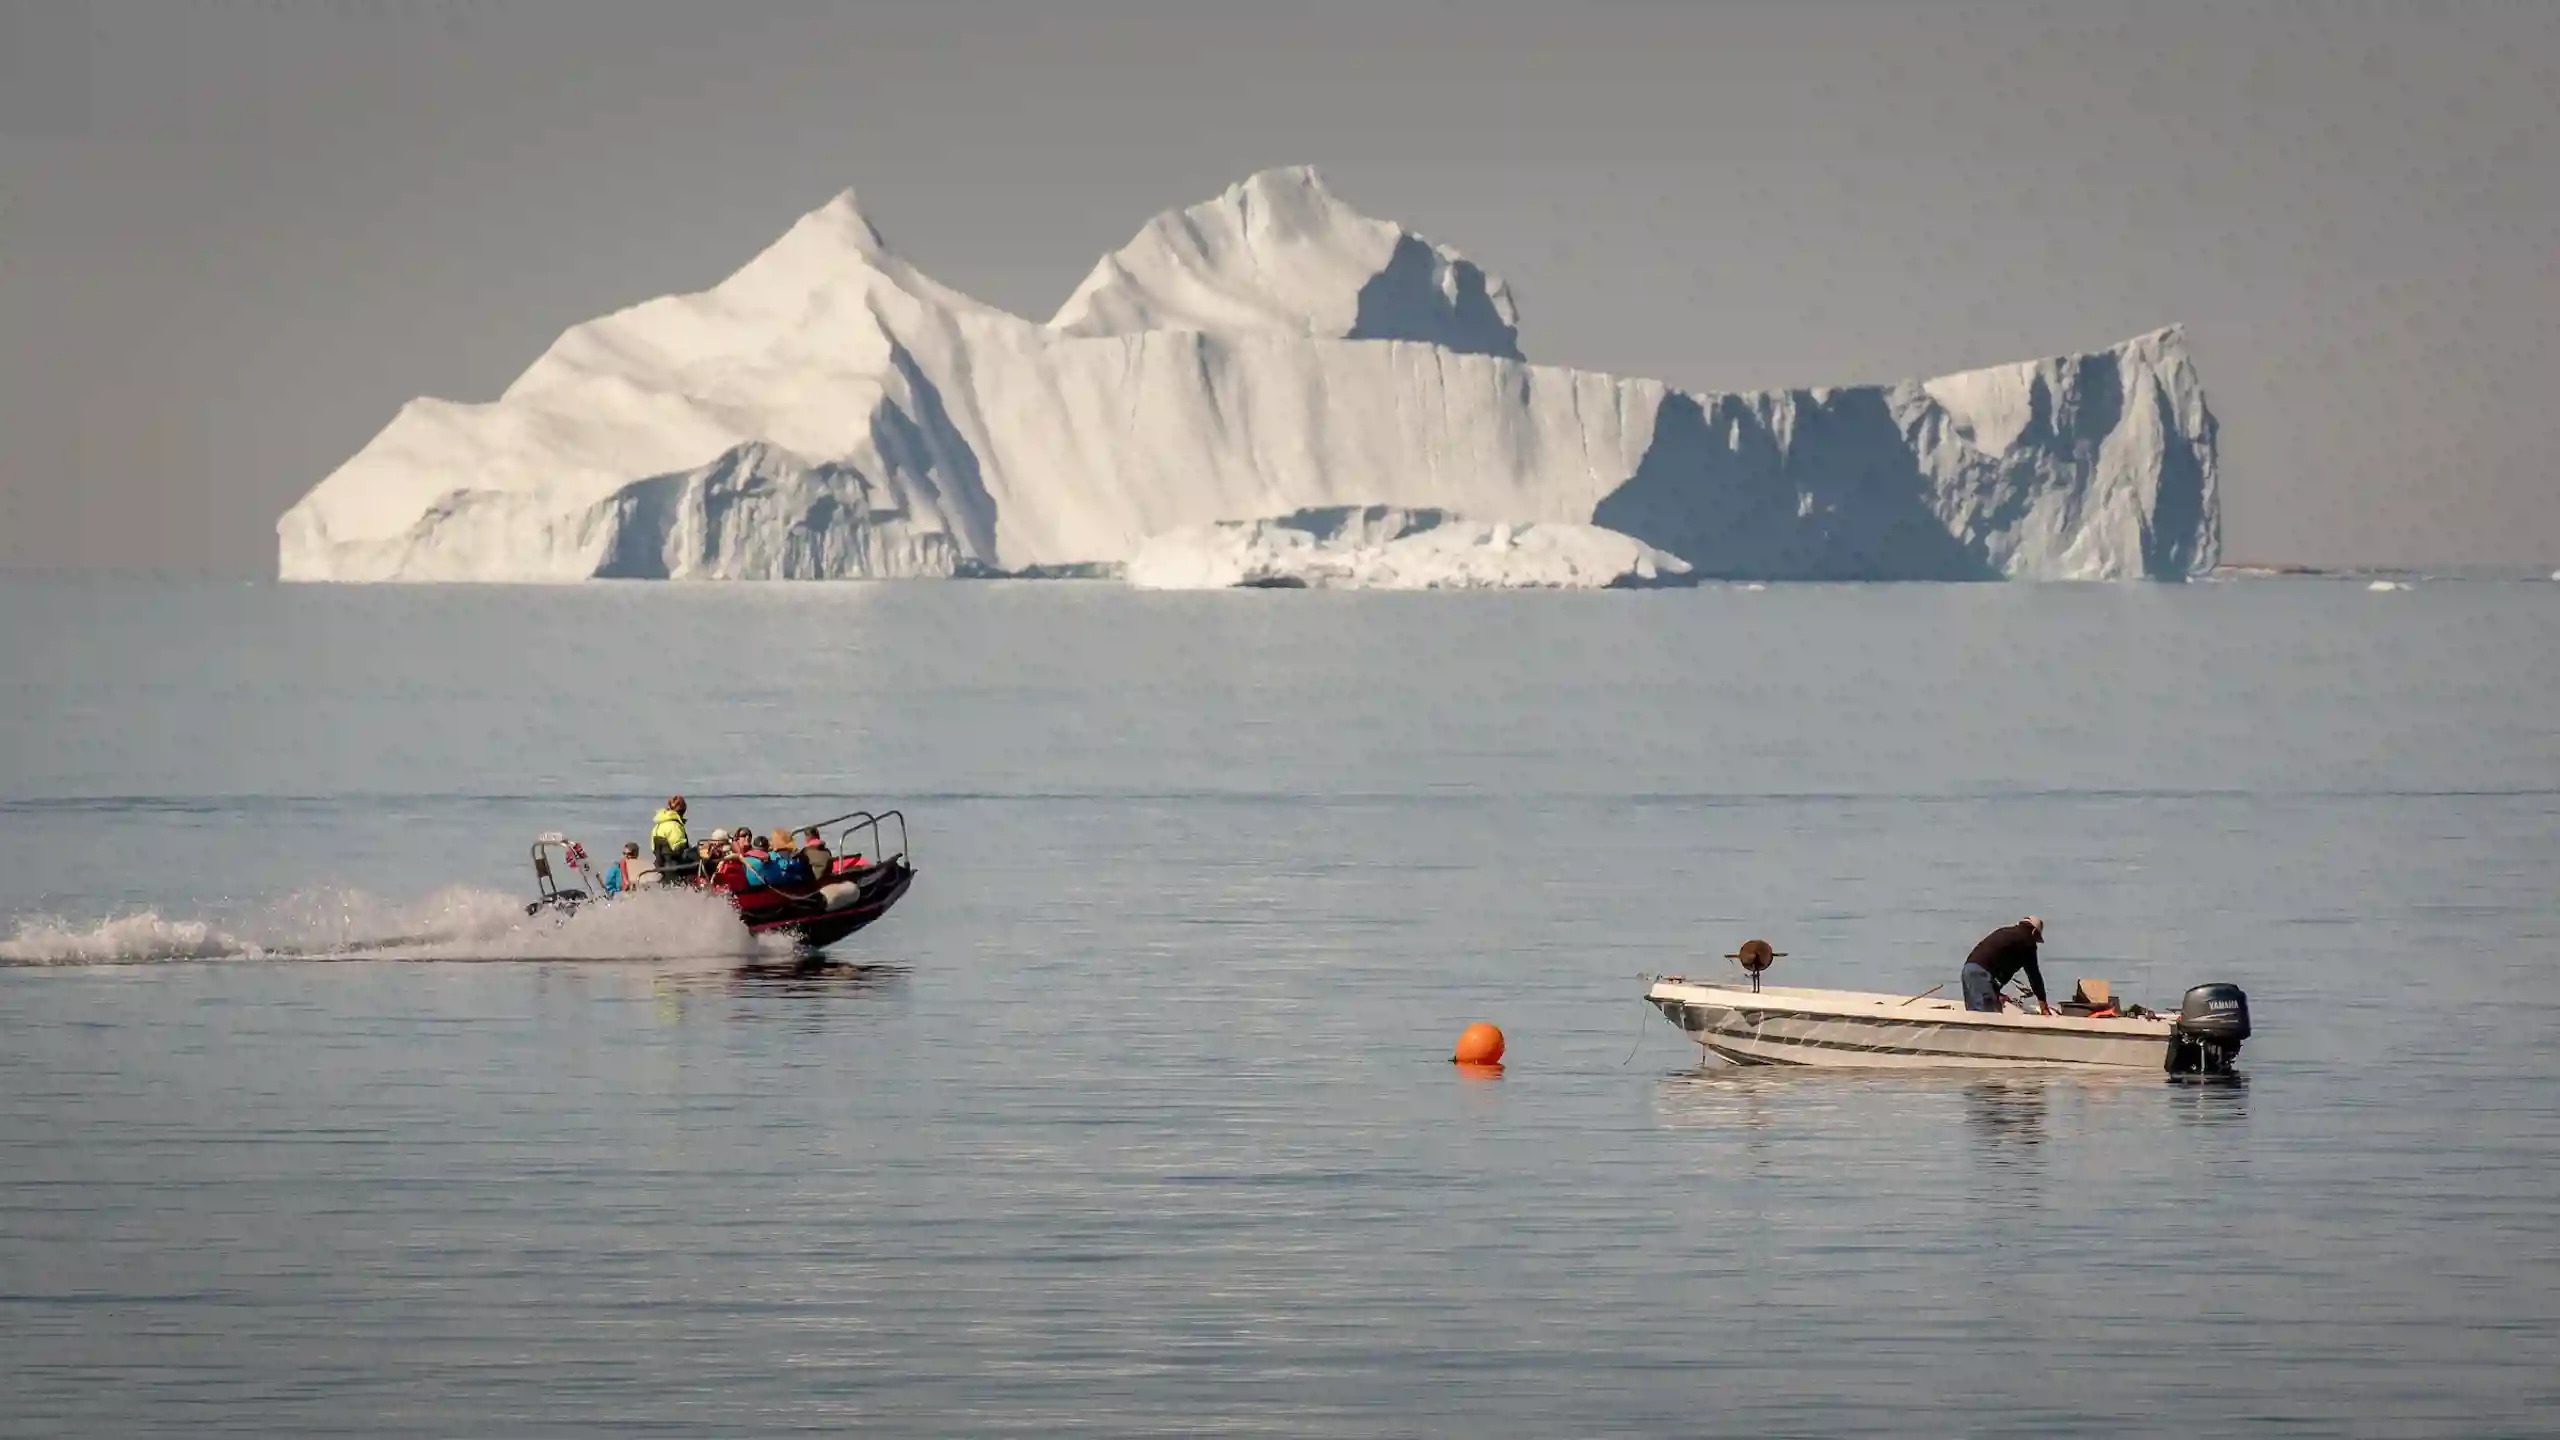 A Tenderboat From MS Fram Going Past A Fisherman At Work In Upernavik In Greenland